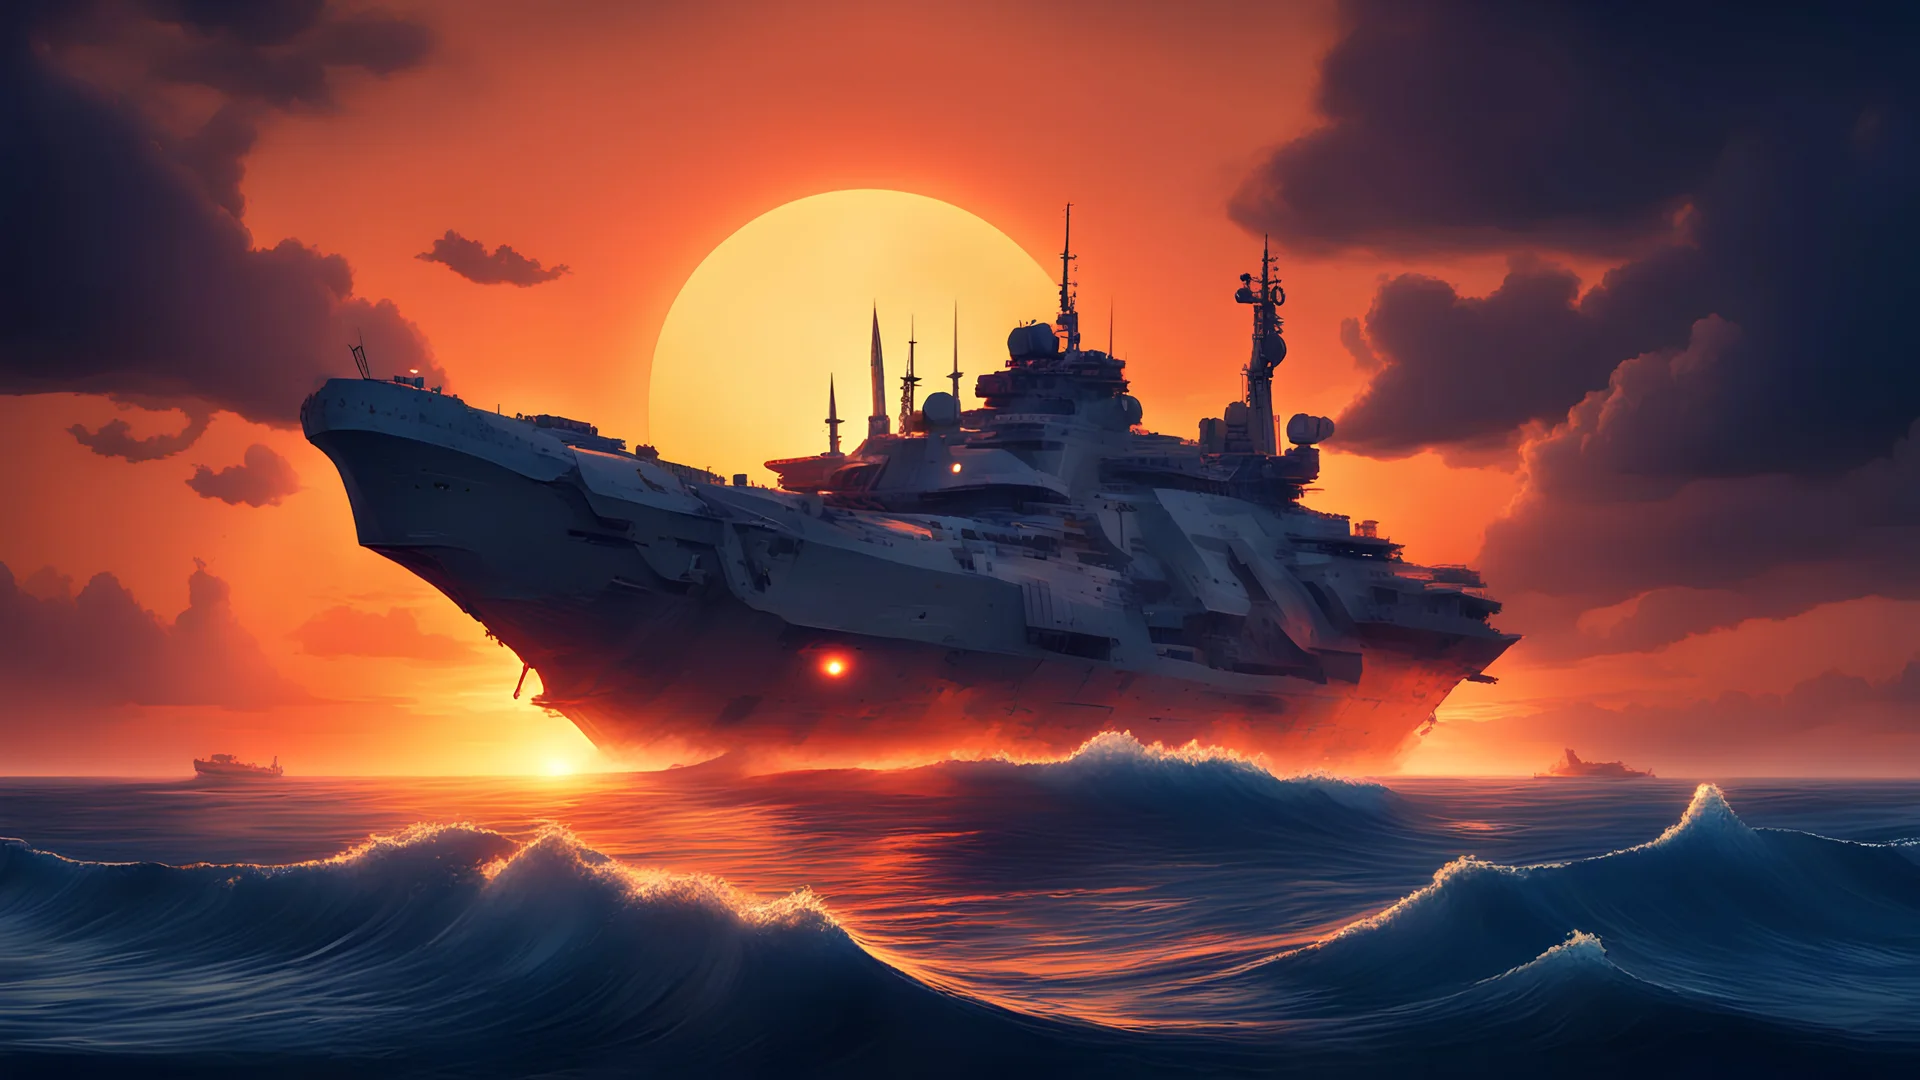 abstract game menu with a big destroyer in the sea against the backround of an orange sunset among the dark blue sky